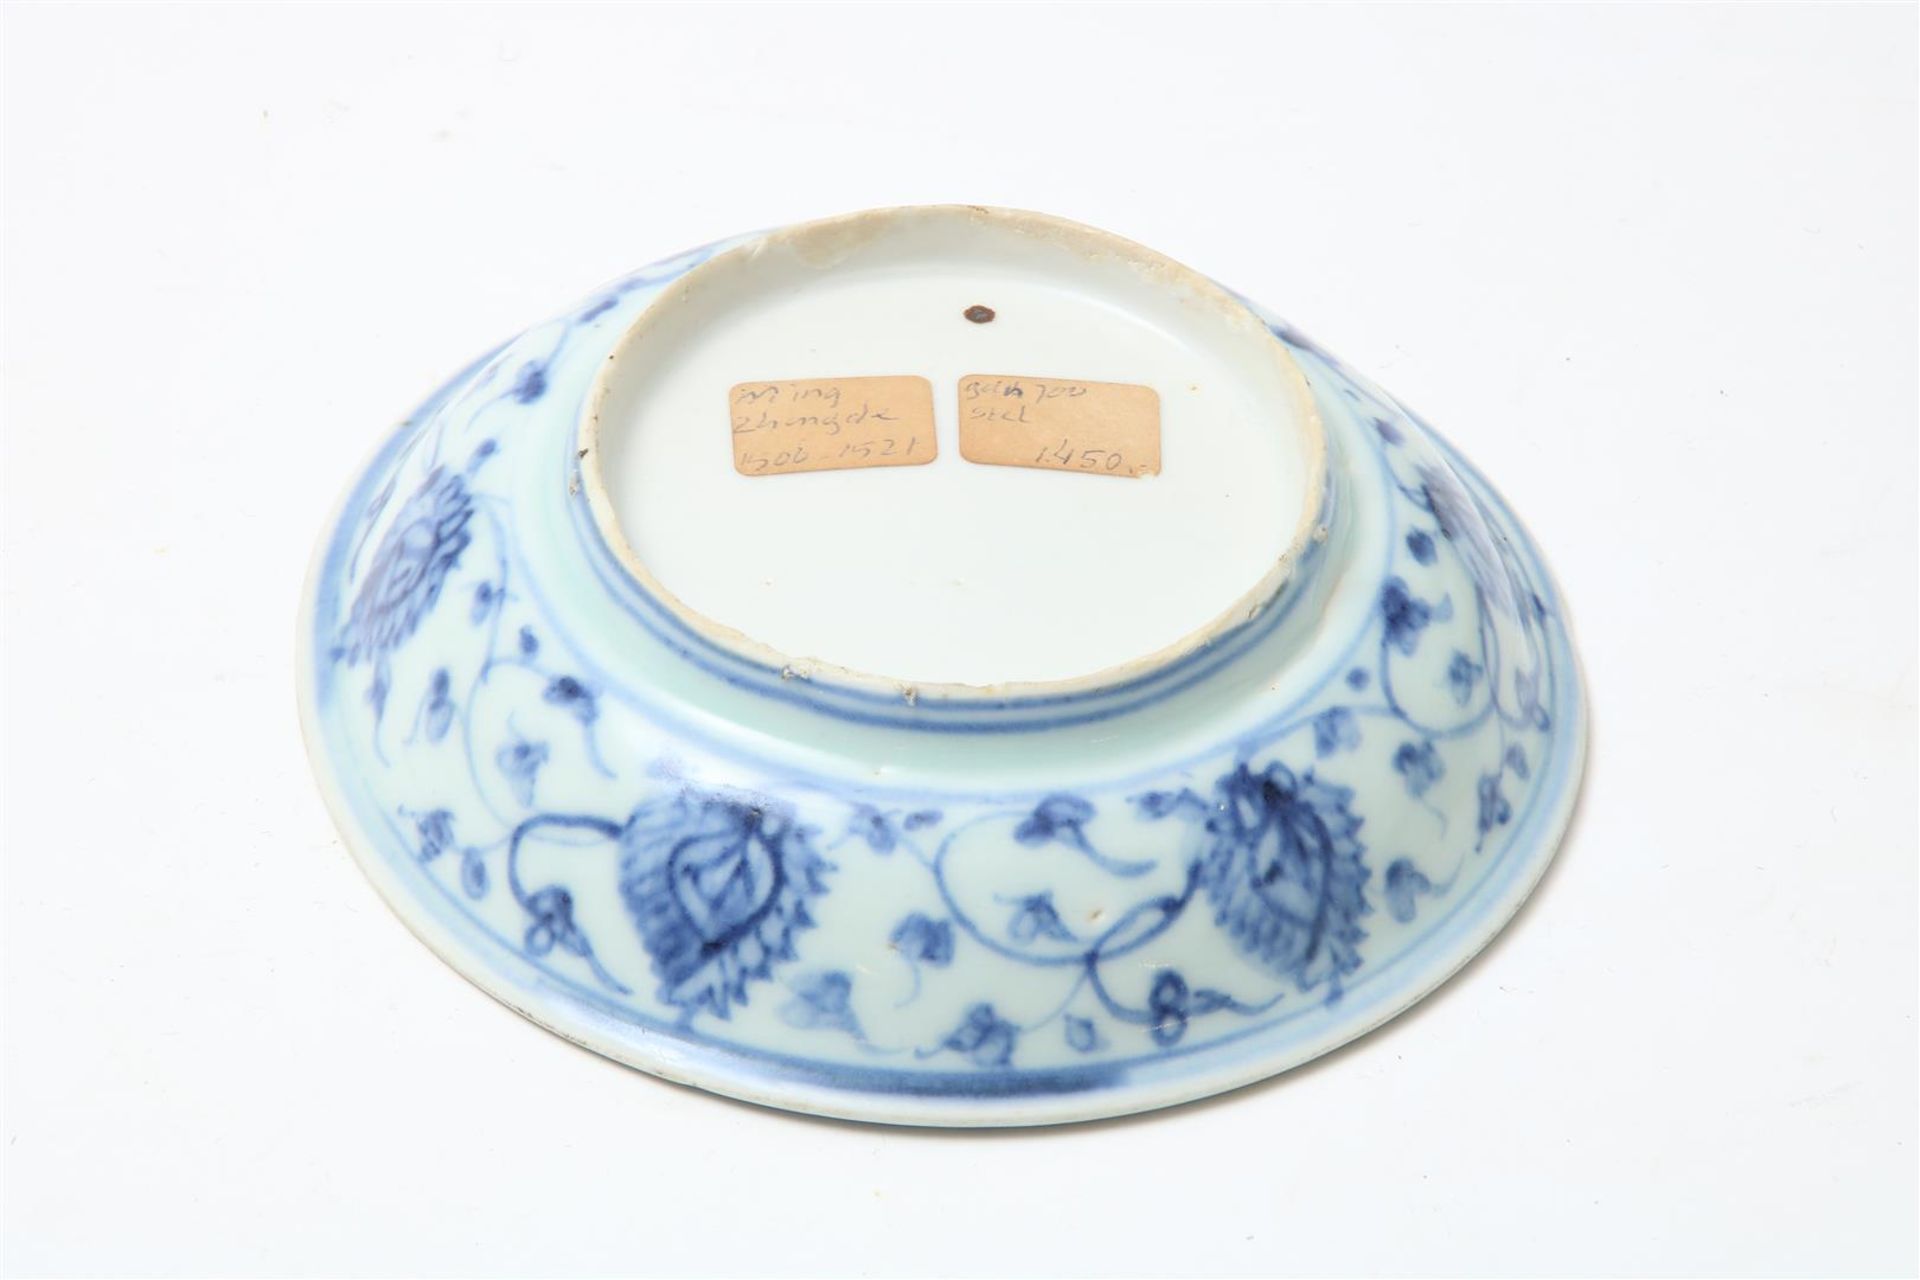 Lot of 5 porcelain dishes (edge flakes) and 4 various saucers, including The Nanking Cargo and Ming, - Image 17 of 19